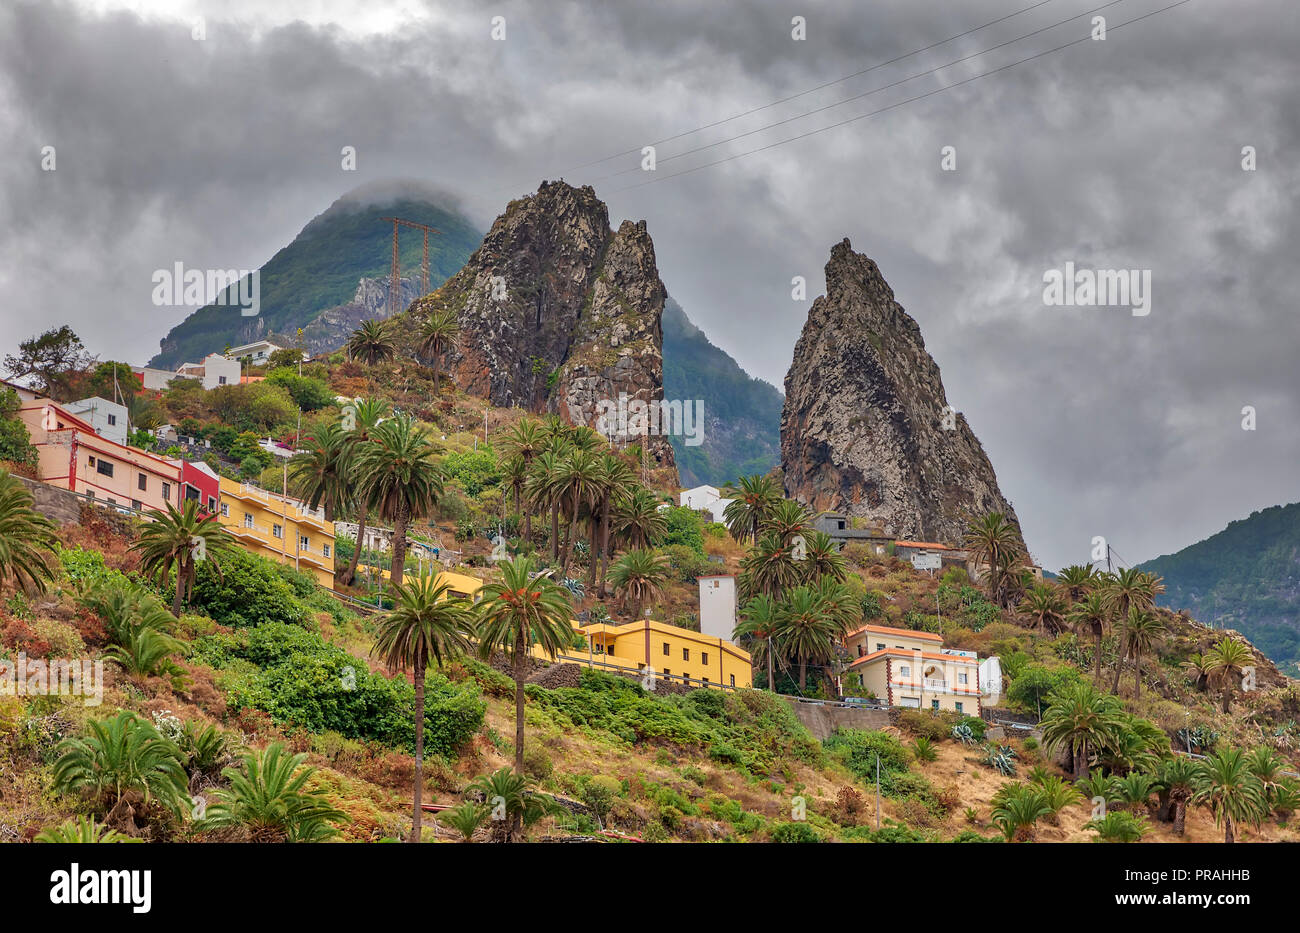 LA GOMERA, SPAIN - AUGUST 18: (EDITORS NOTE: Image is a digital [High Dynamic Range, HDR] composite.) Two huge rocks tower over the village at Hemigua on August 18, 2018 in La Gomera, Spain. The mountains of the island are often covered by clouds in summer too. Stock Photo